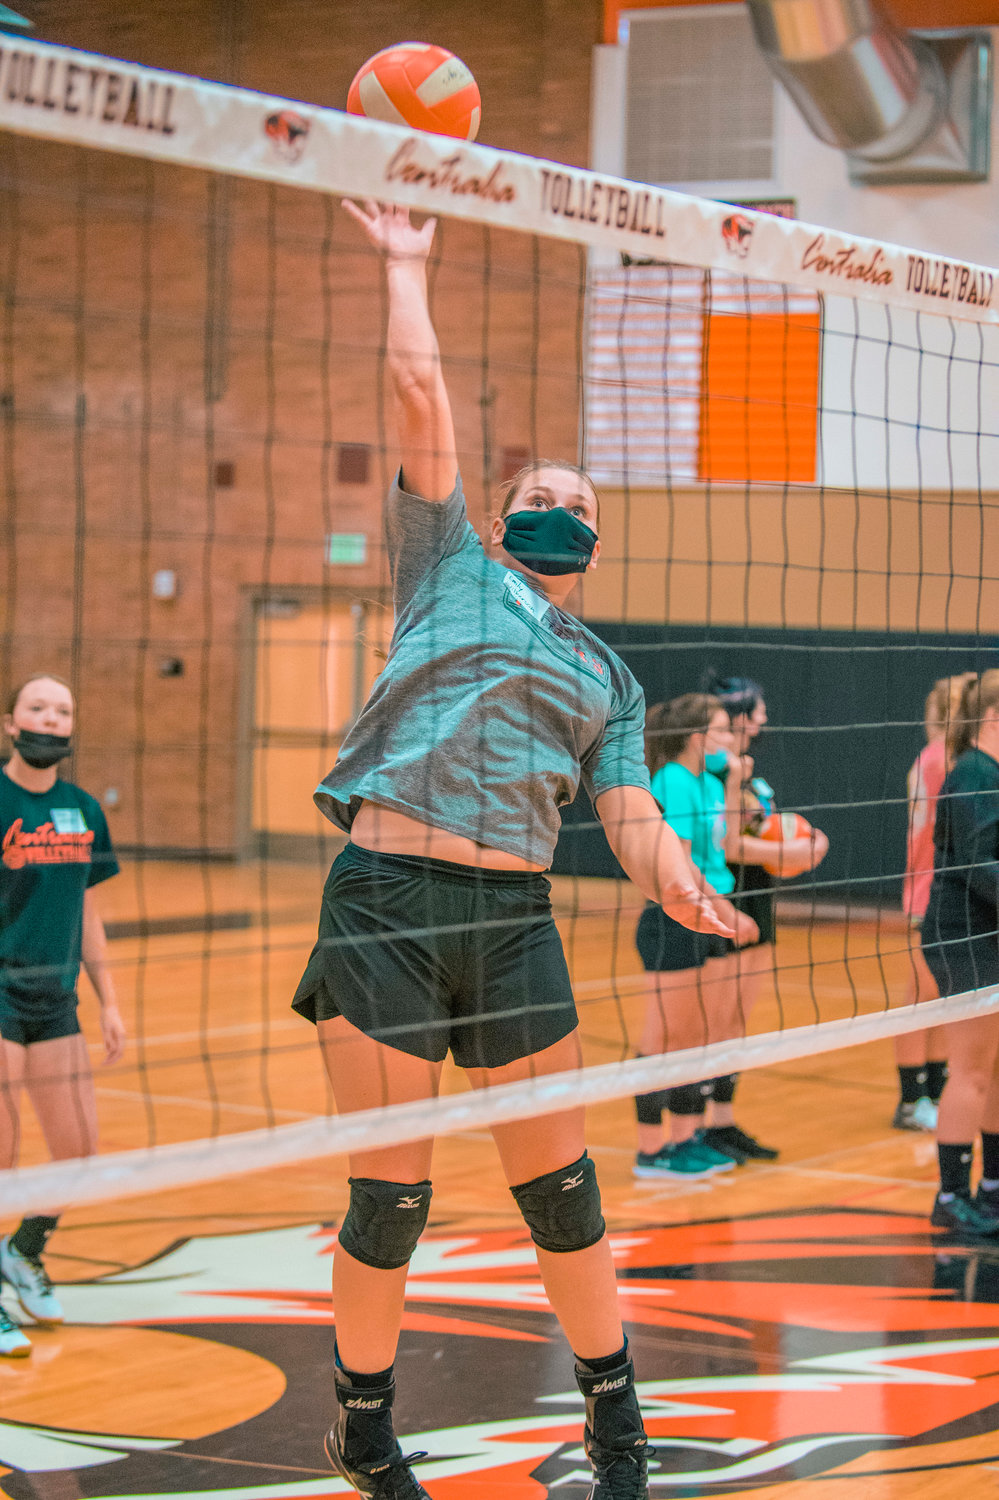 Centralia's Emily Wilkerson leaps for a ball at the net during practice on Tuesday.